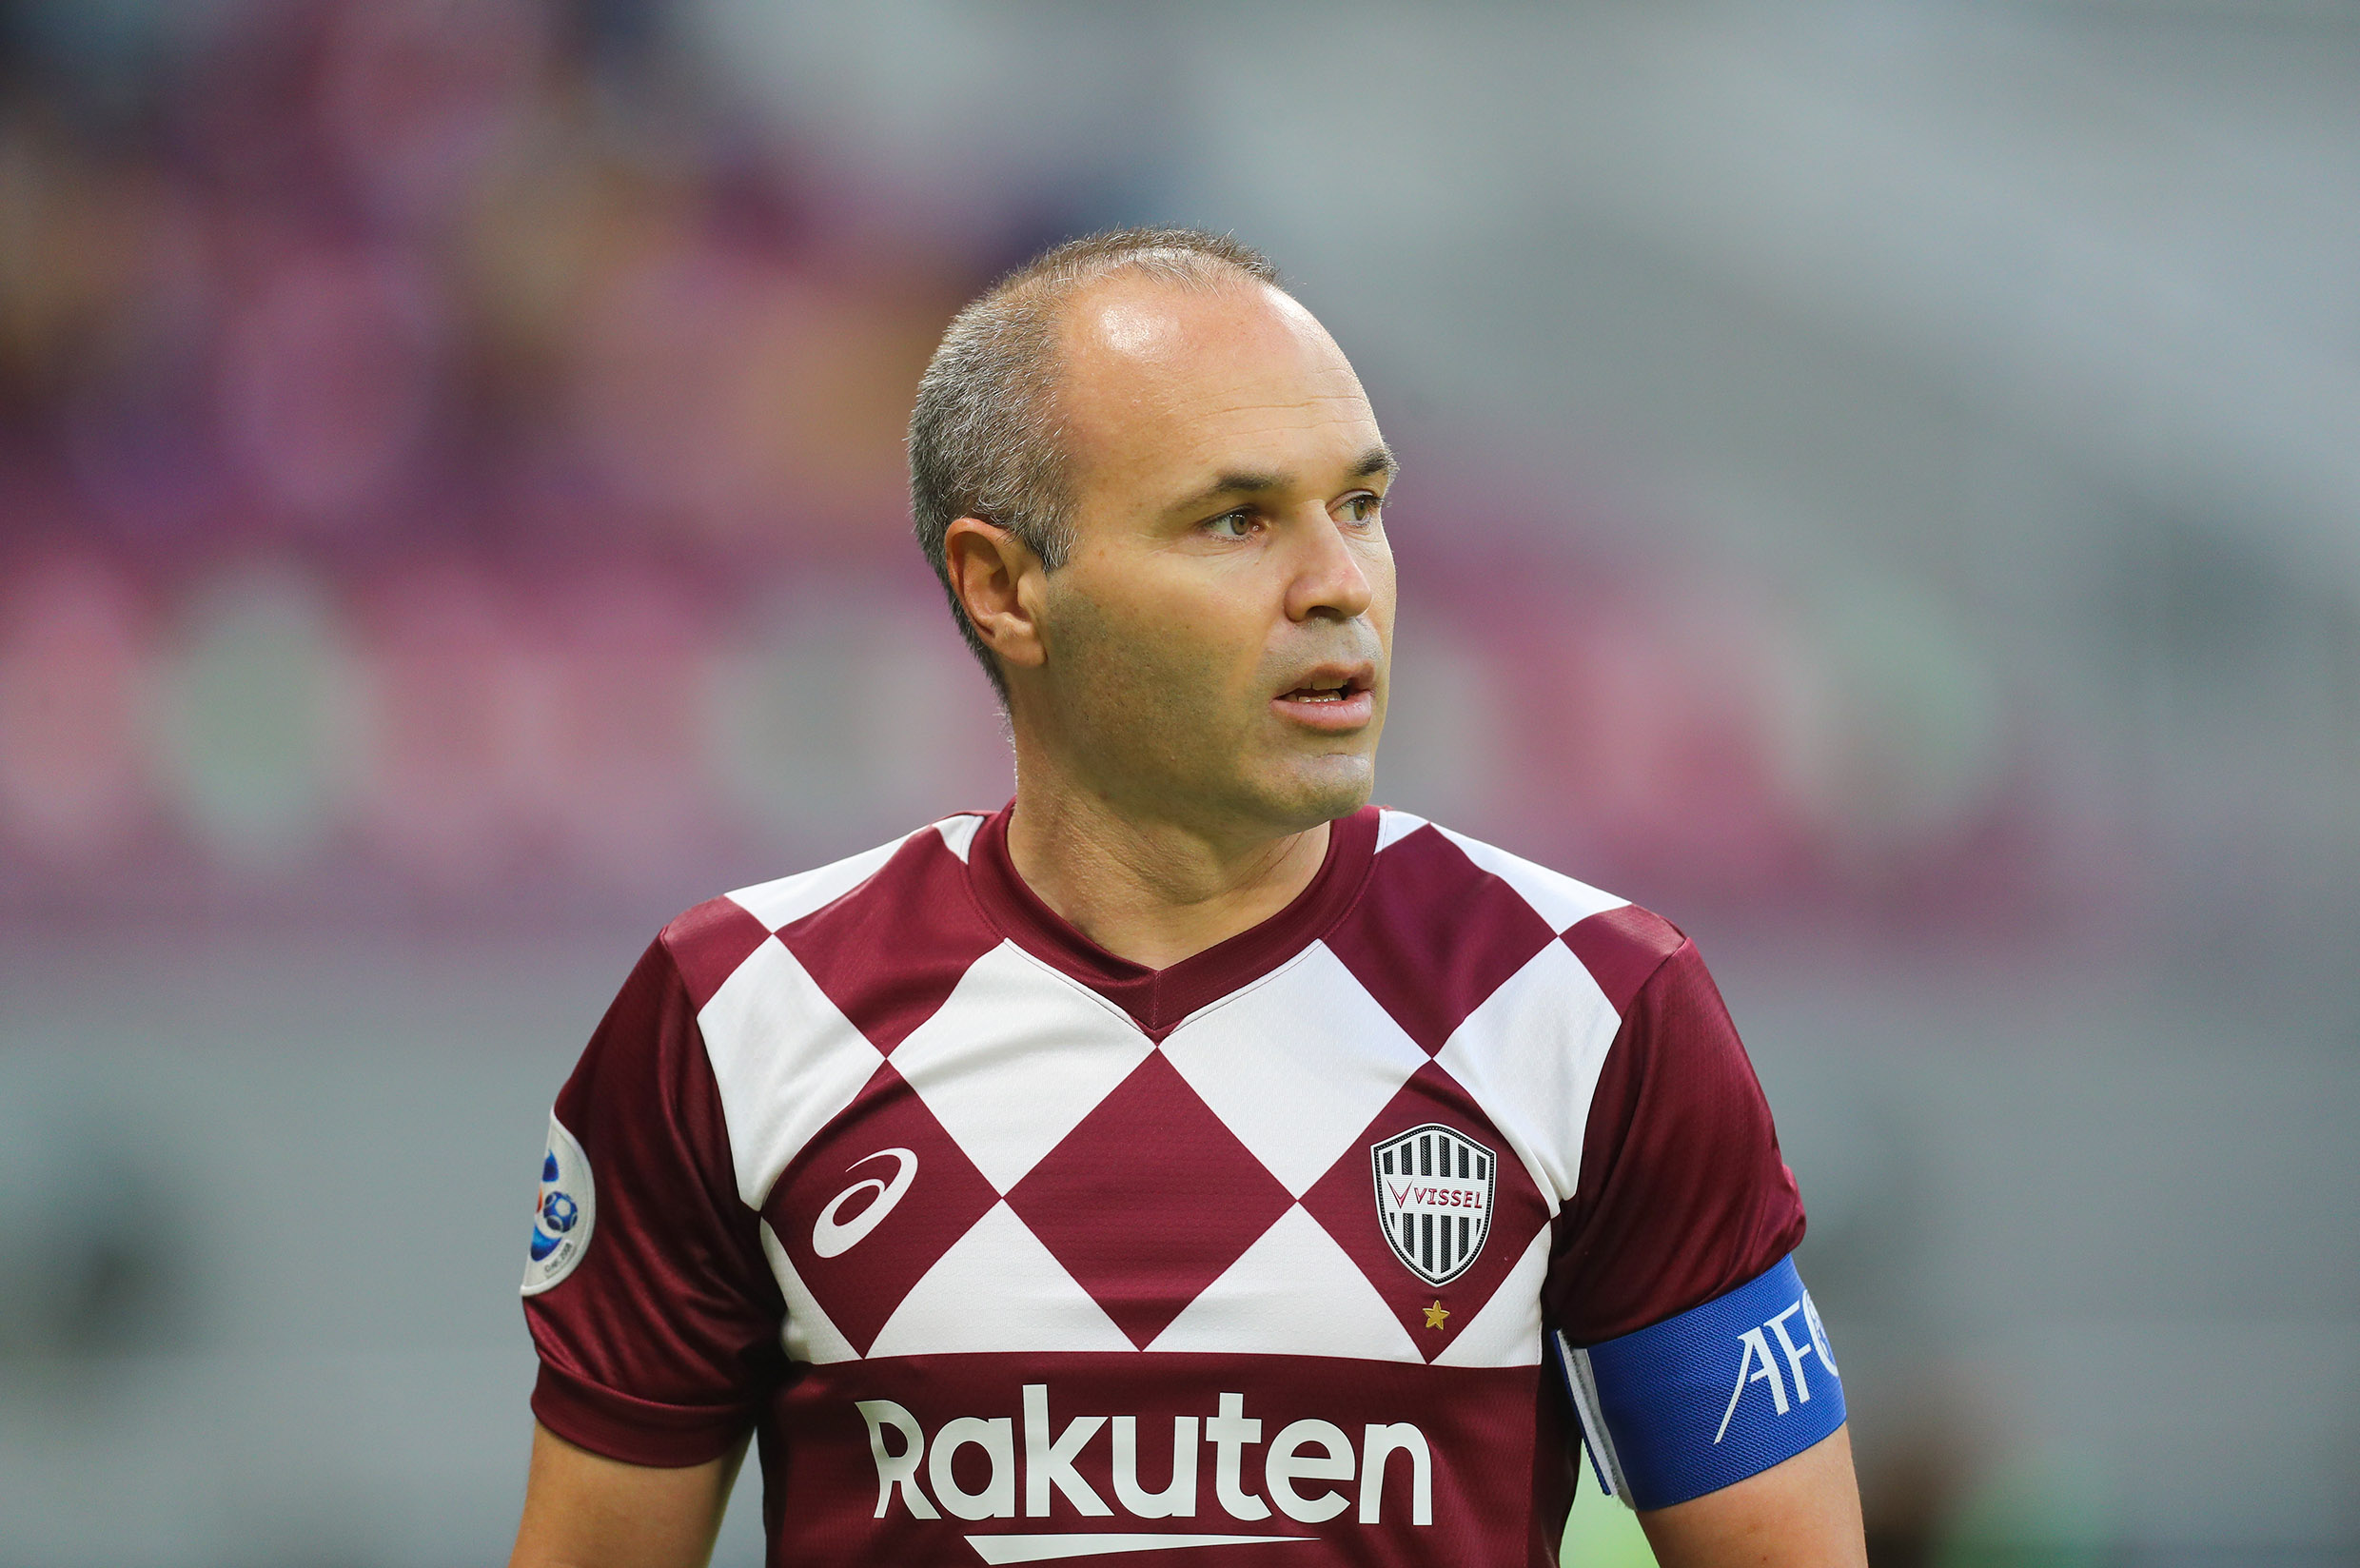 Andres Iniesta is confident Barcelona could defeat Inter Wednesday, but he’s wary of Simone Inzaghi’s side: "The previous result was very negative."